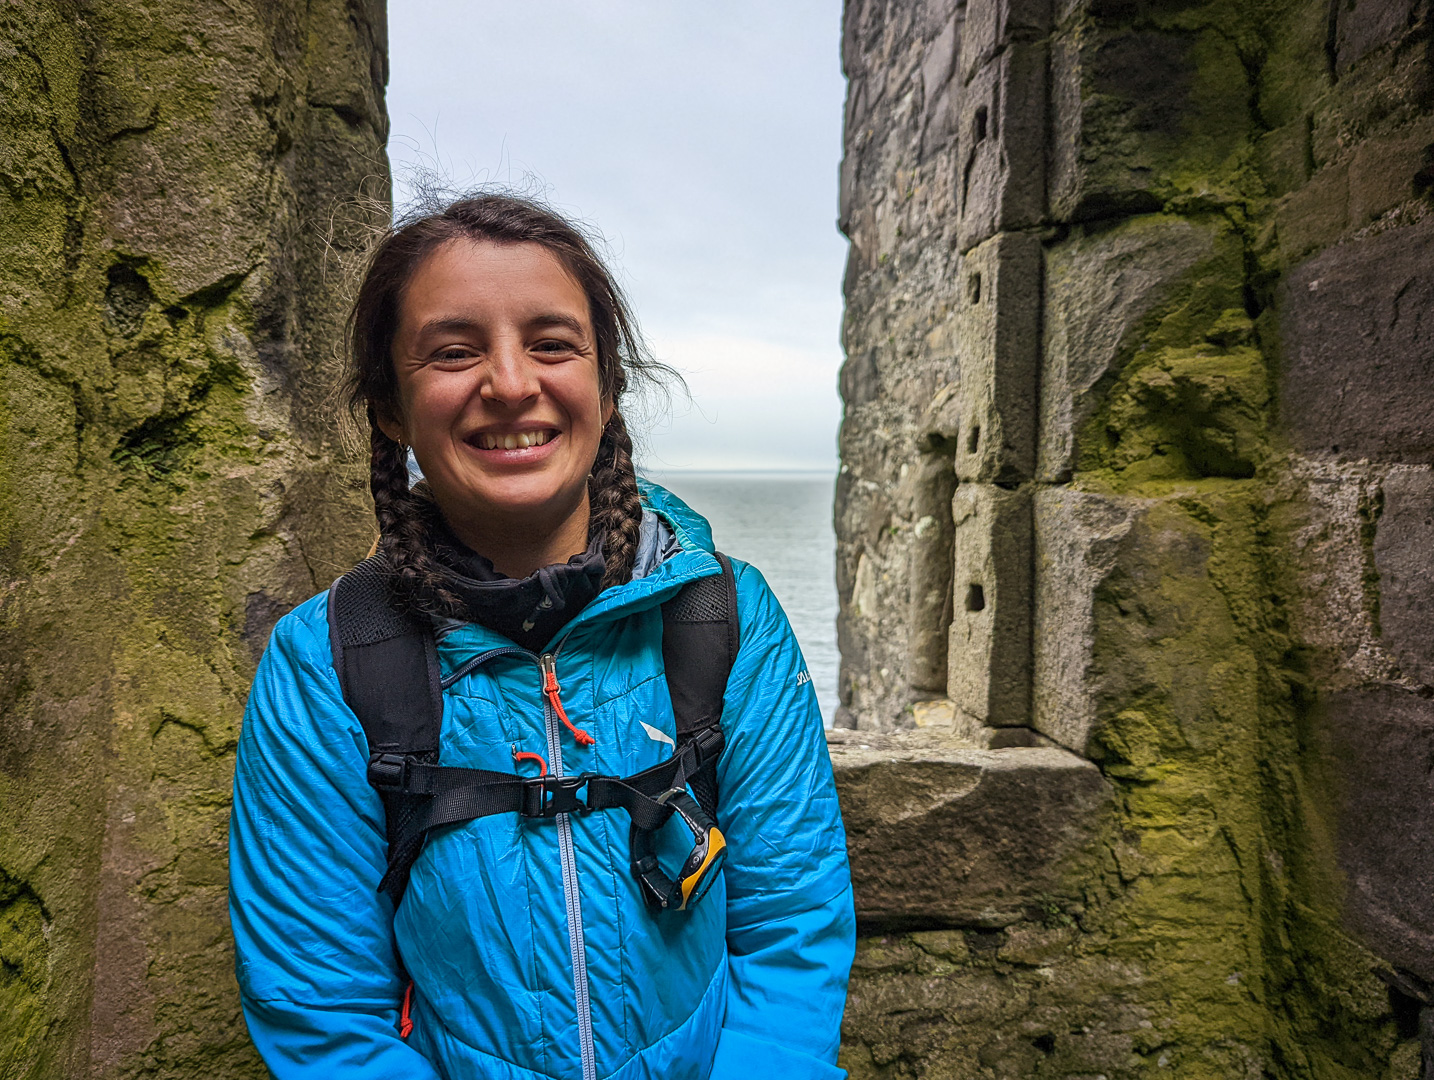 Kirsty Pallas on Guiding Hikes & Outdoor Diversity